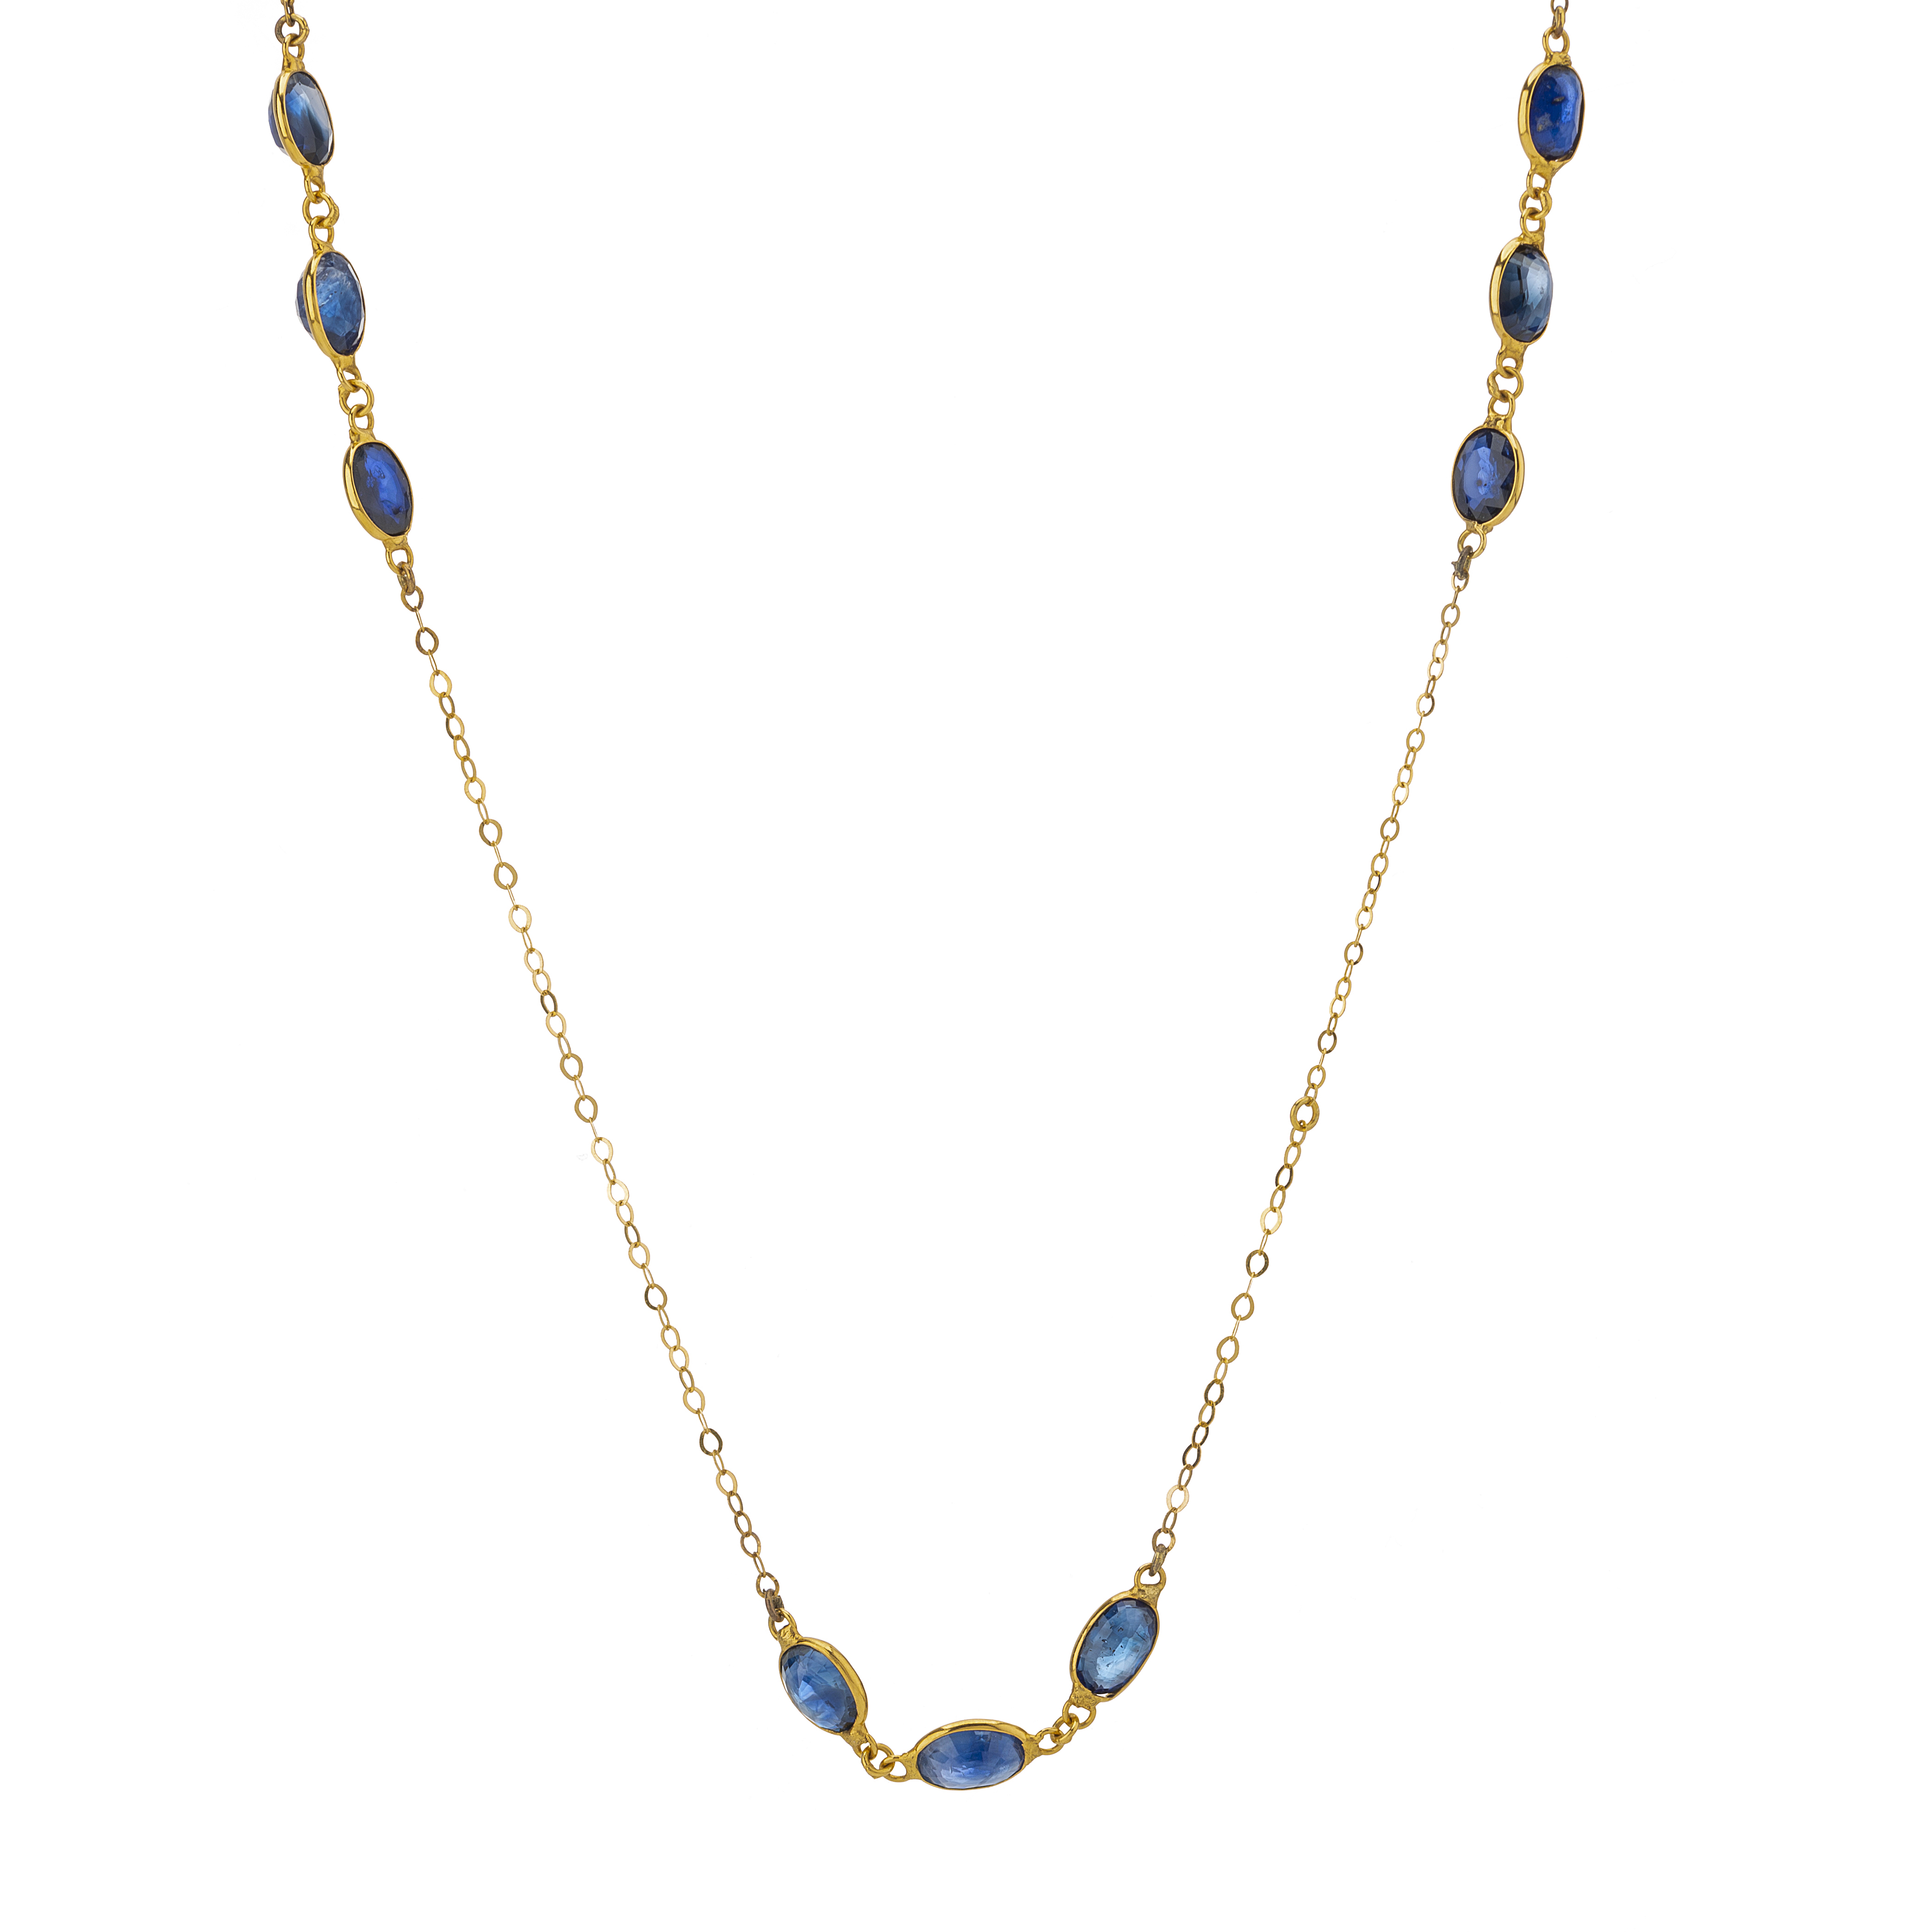 A 18ct gold sapphire necklace